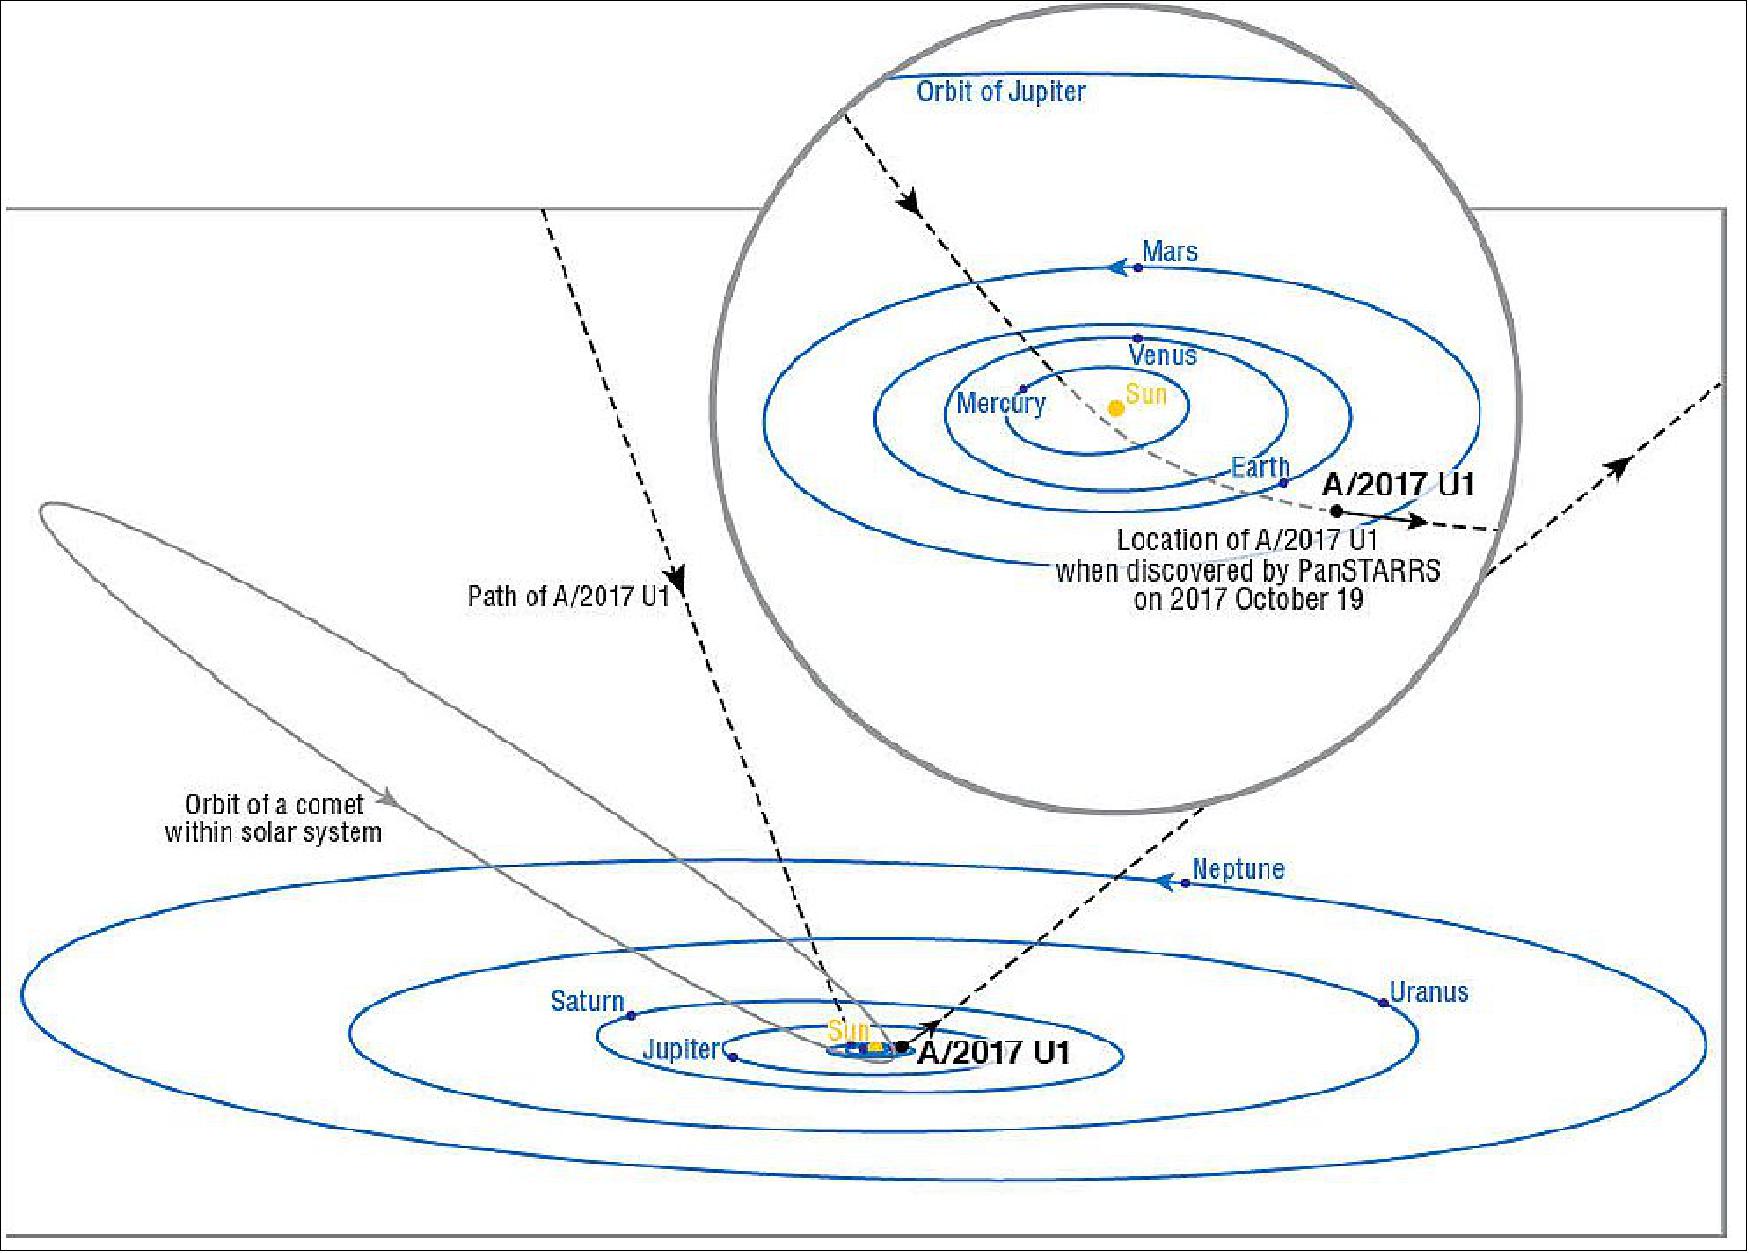 Figure 11: The path of A/2017 U1 through our solar system in comparison to the orbit of a typical Halley-type comet. The inset shows the inner solar system, with the solid line segment along A/2017 U1's trajectory indicating the short window during which it was bright enough to be detected by telescopes on Earth. The path is shown as a lighter shade when the object was below the ecliptic (image credit: Brooks Bays / SOEST Publication Services / UH Institute for Astronomy)